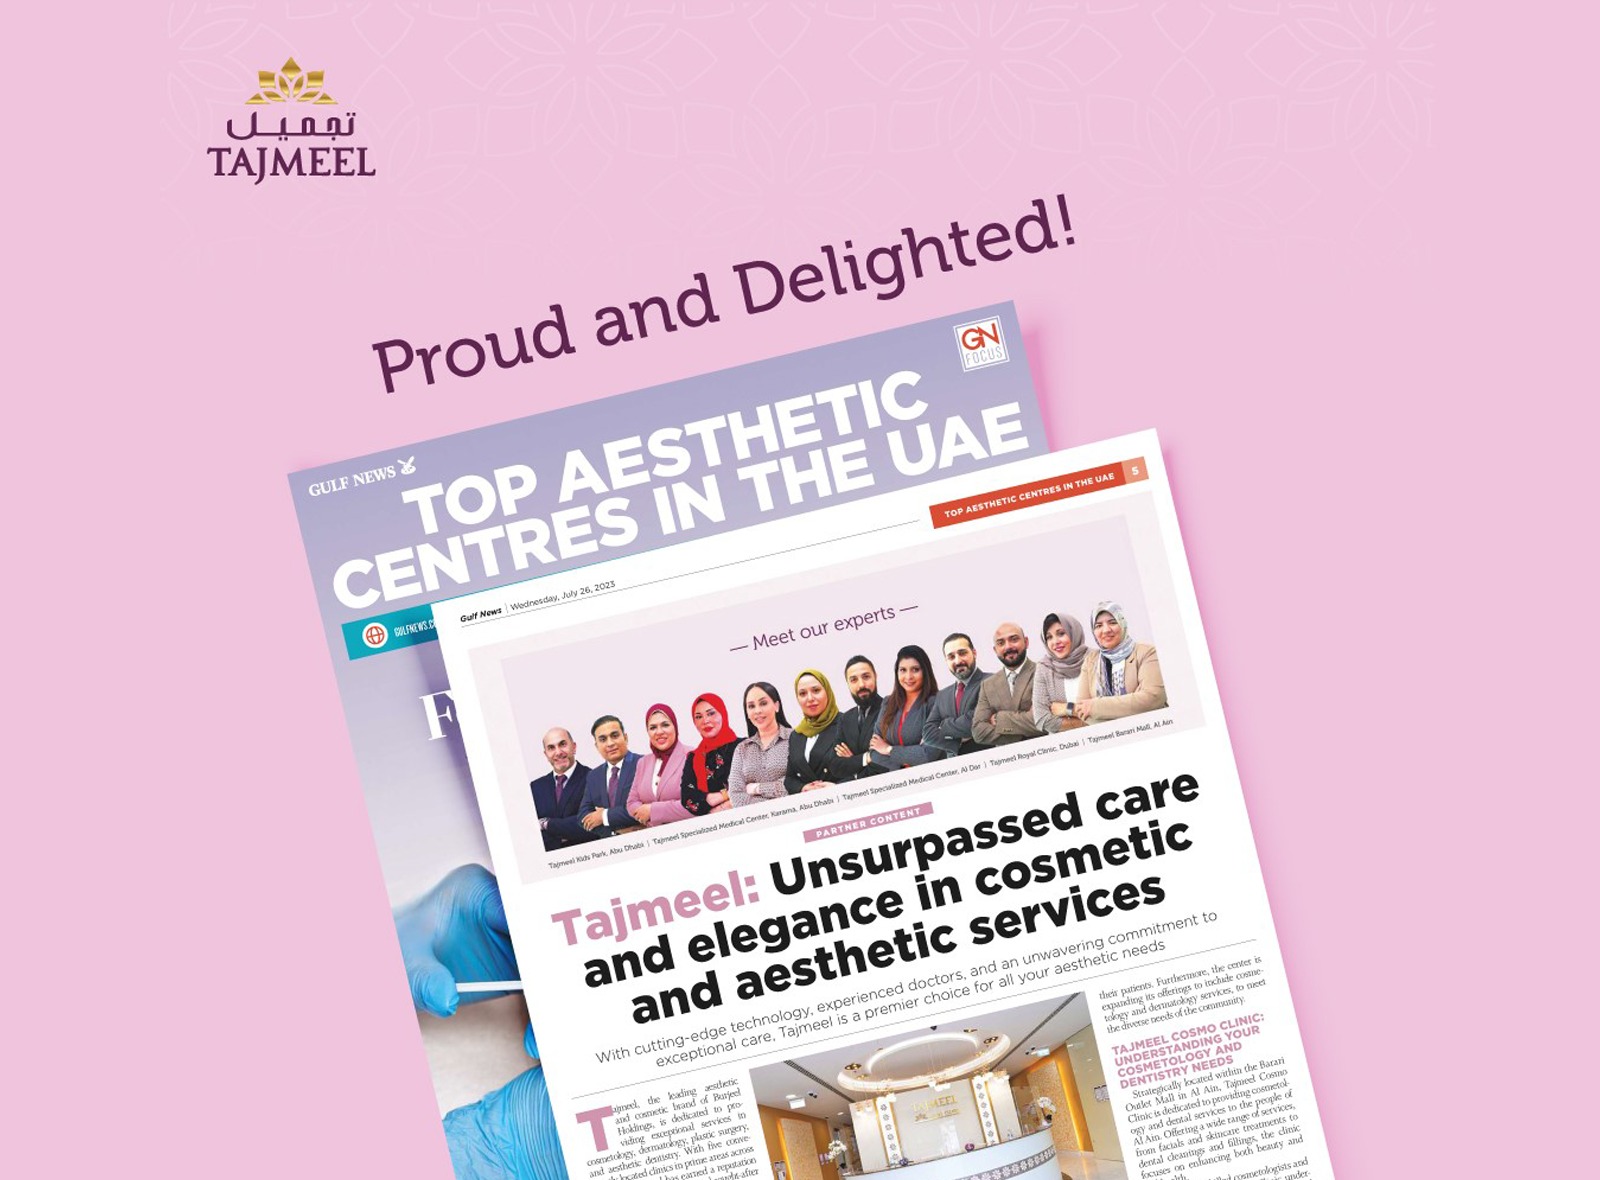 Tajmeel: Unsurpassed care and elegance in cosmetic and aesthetic services